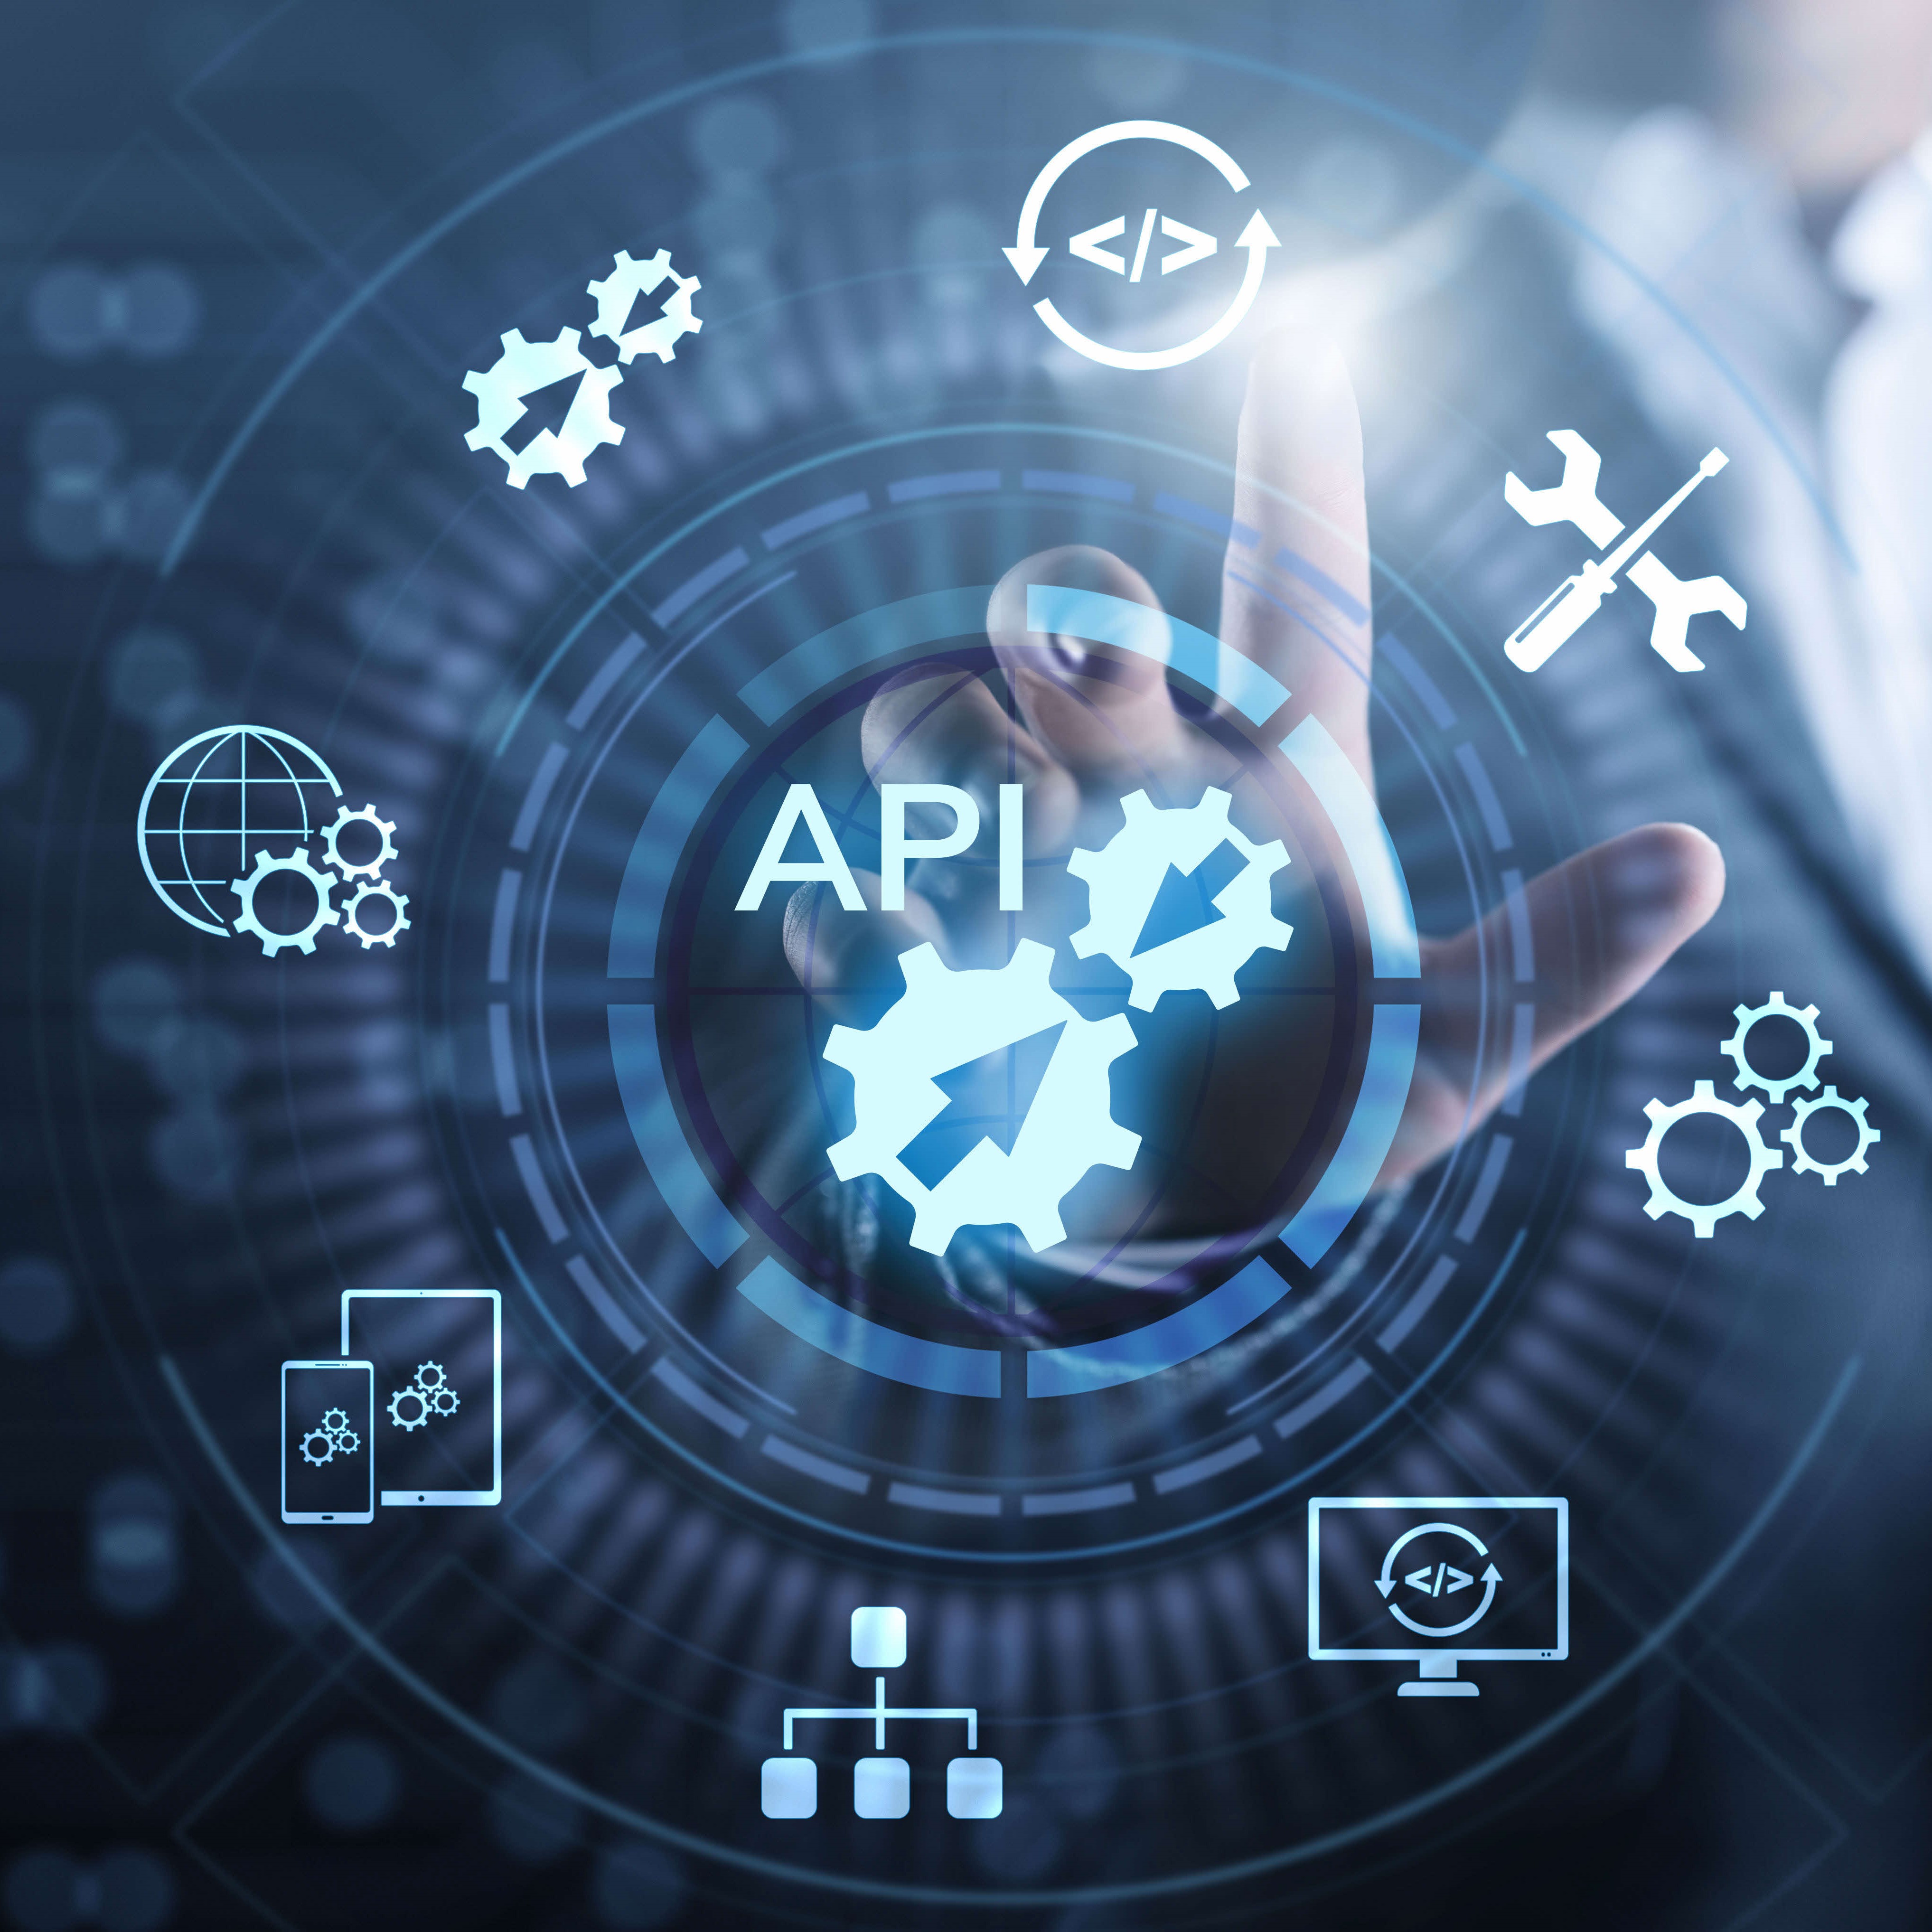 API enabled transformation for treasurers